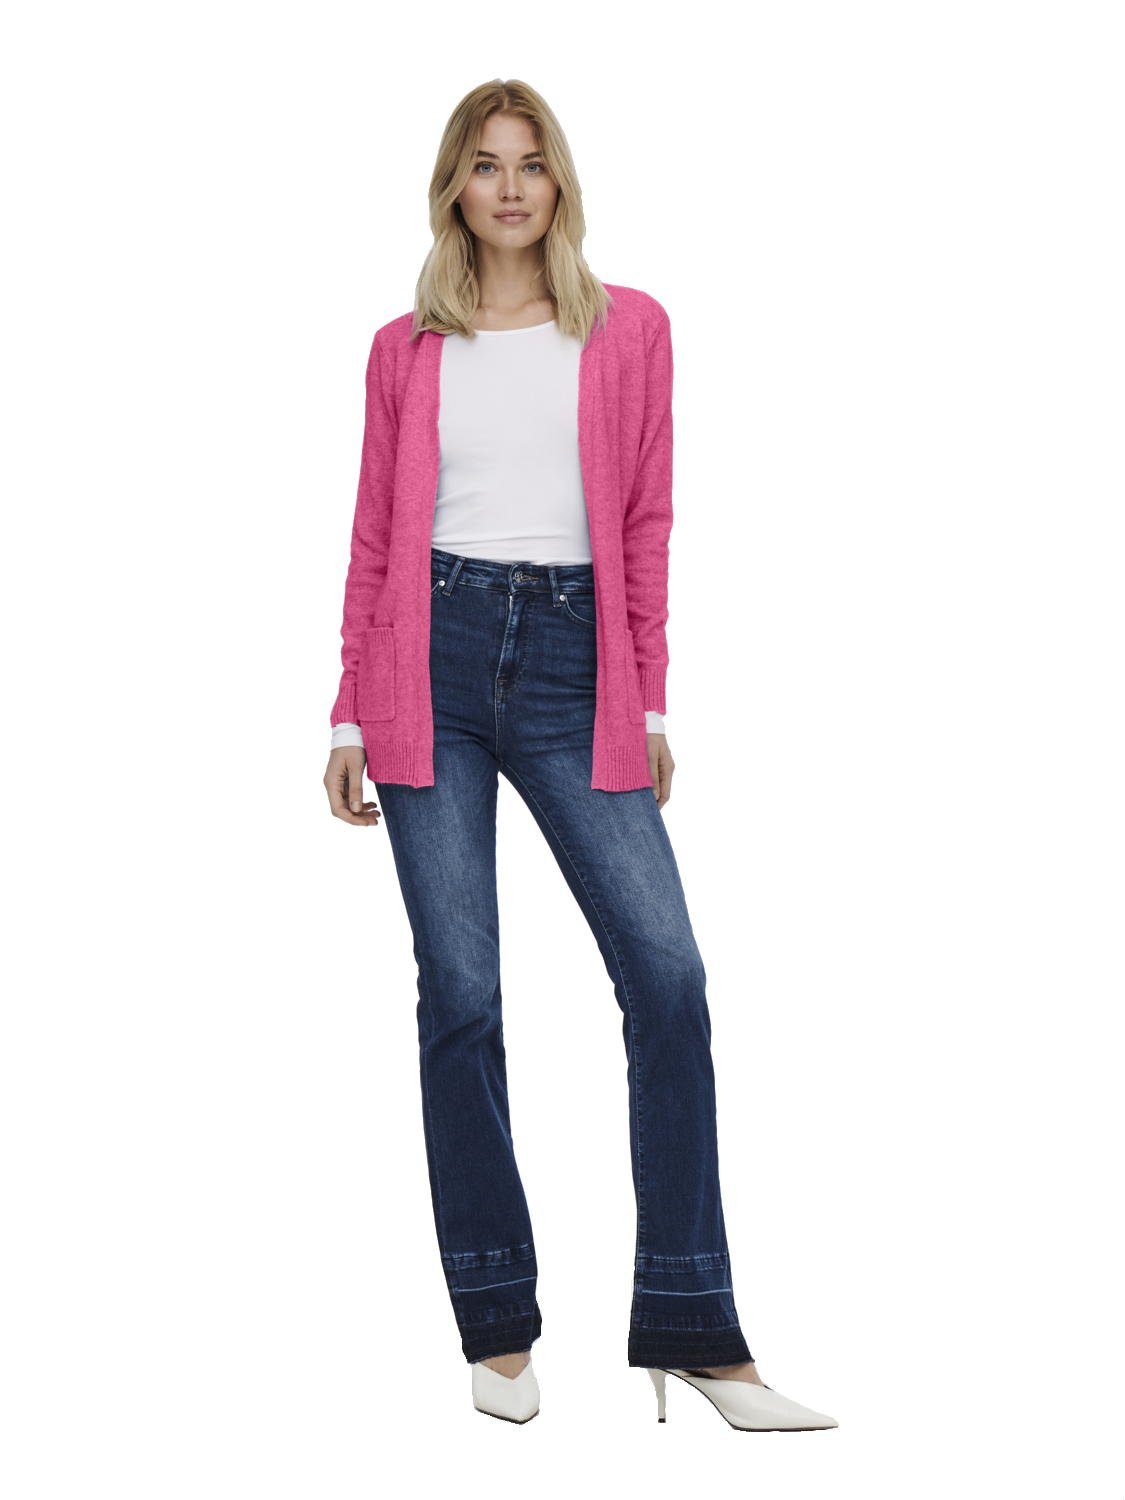 OnlLesly Open female ONLY Knt Cardigan Pink - Only Damen Cardigan Strick-Jacke offen